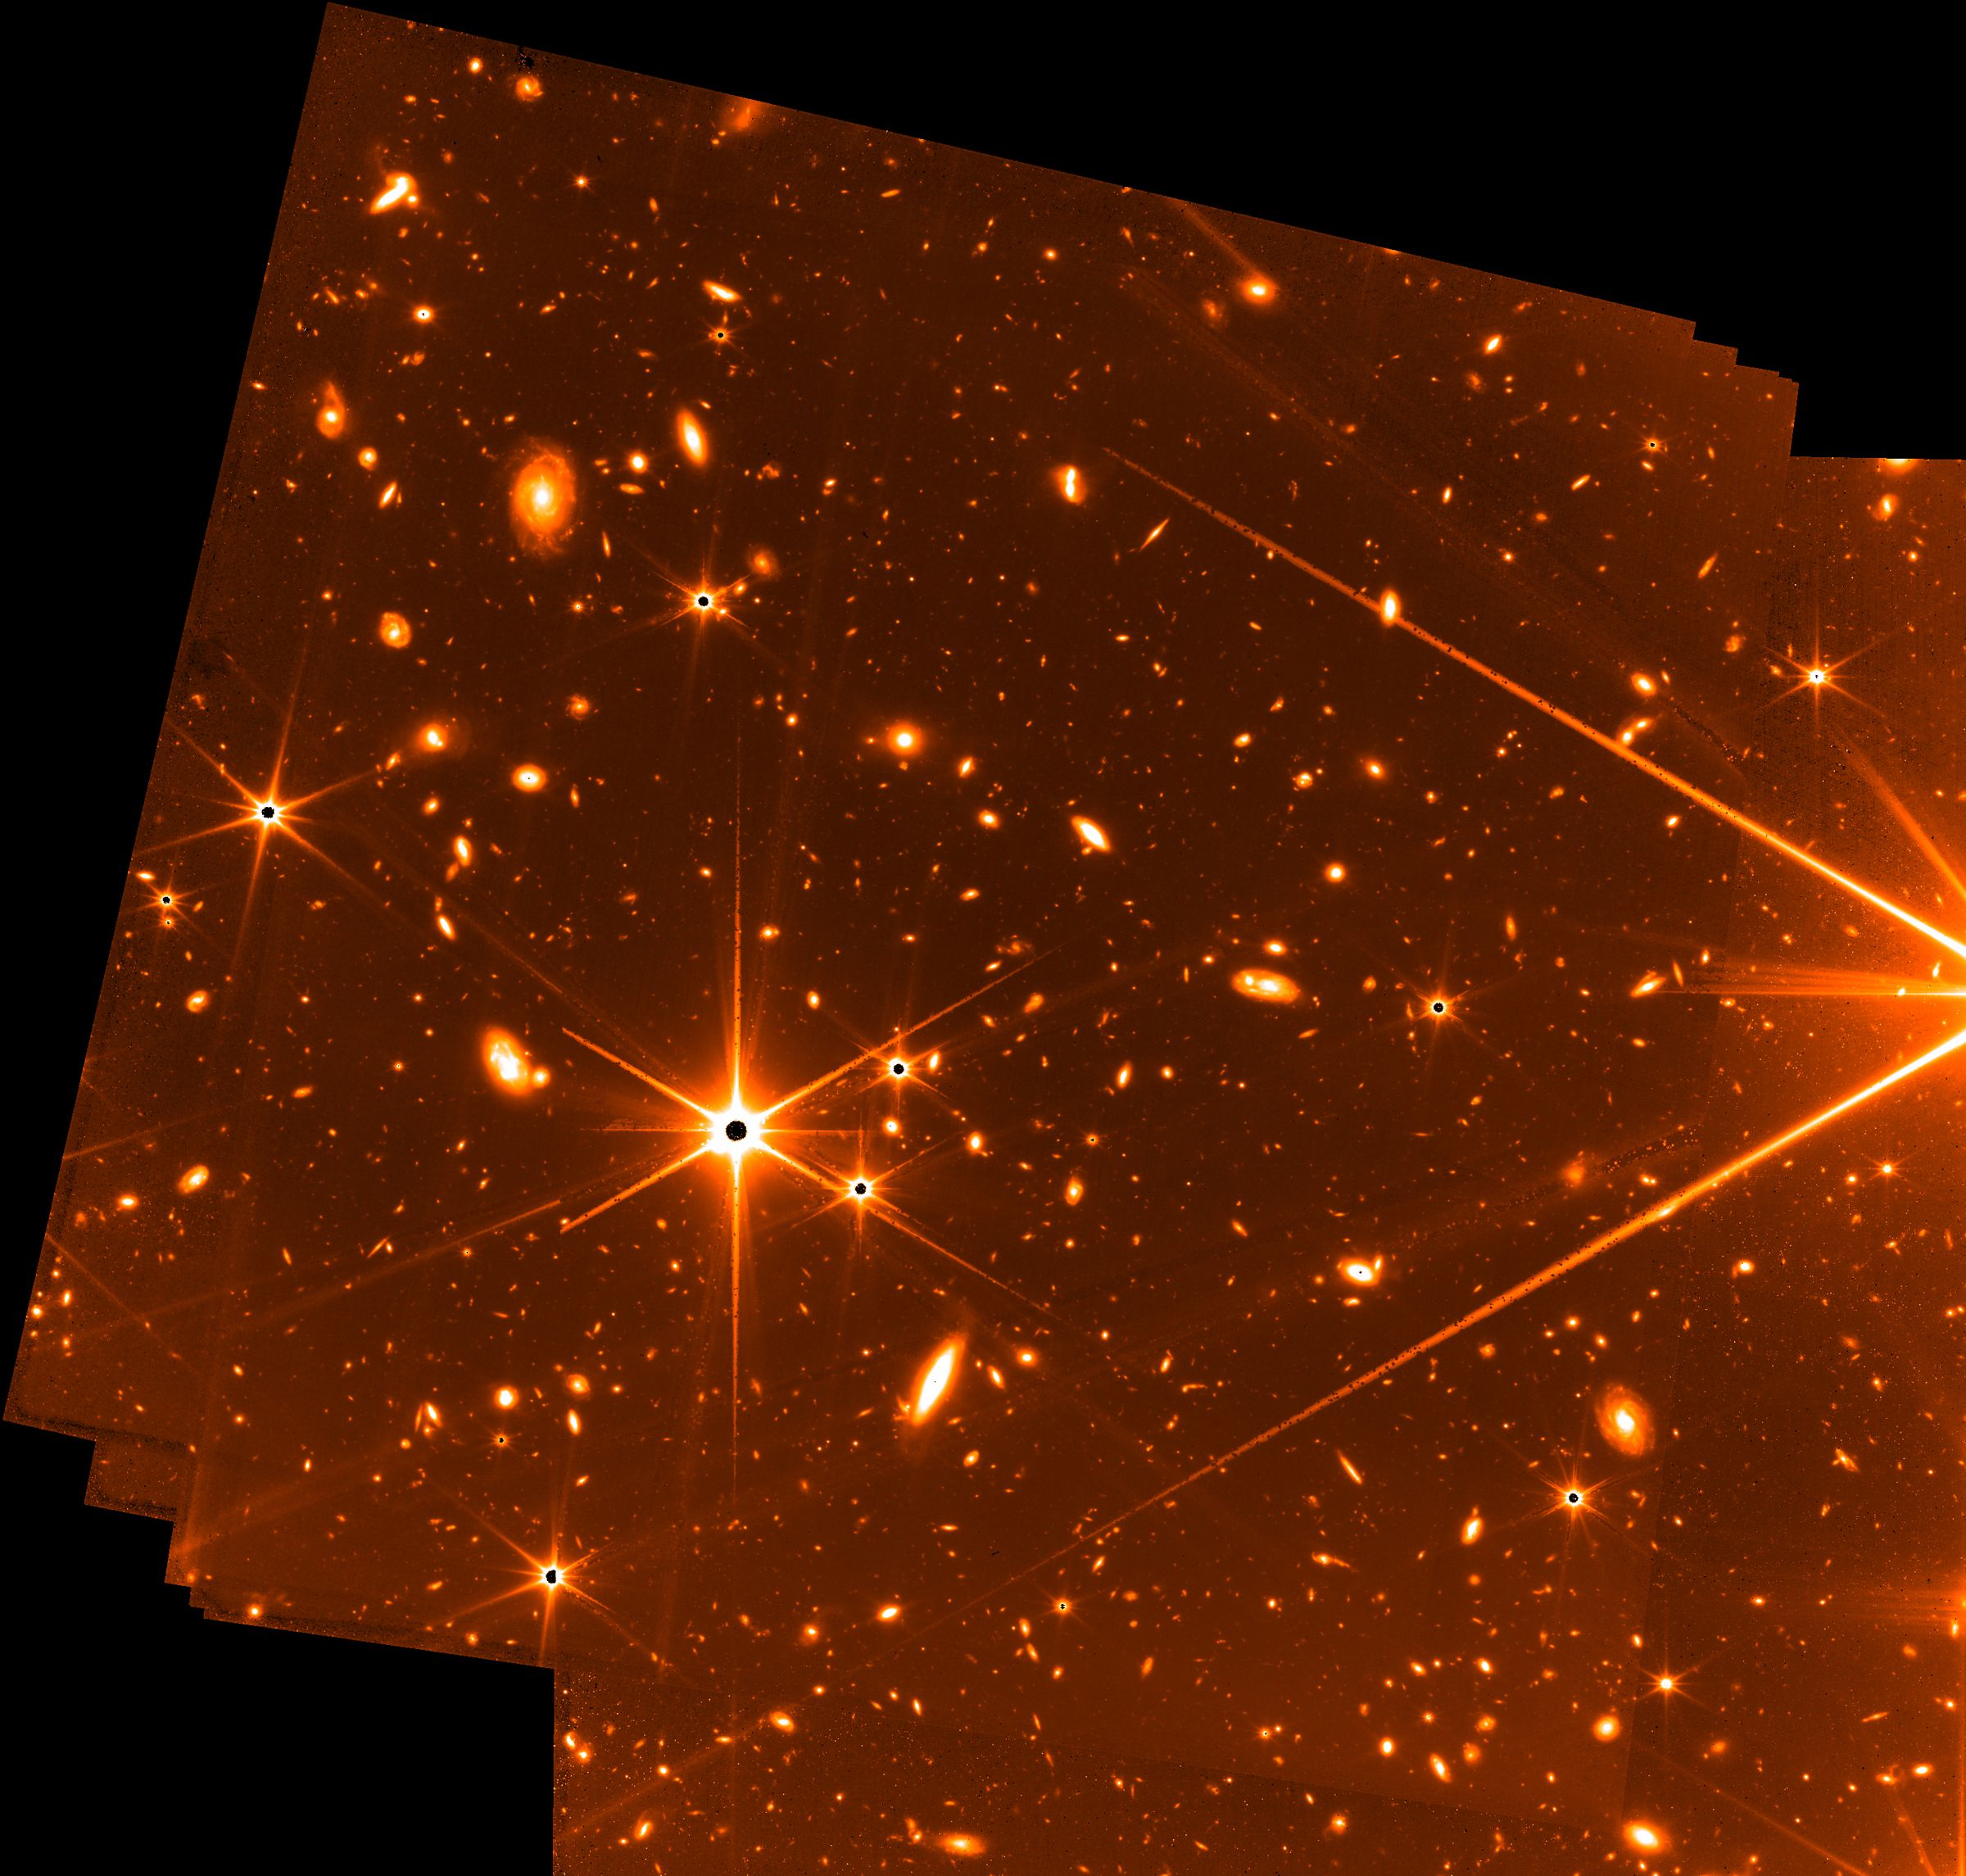 An image captured by JWST’s Fine Guidance Sensor before the big reveal, taken over a period of eight days.